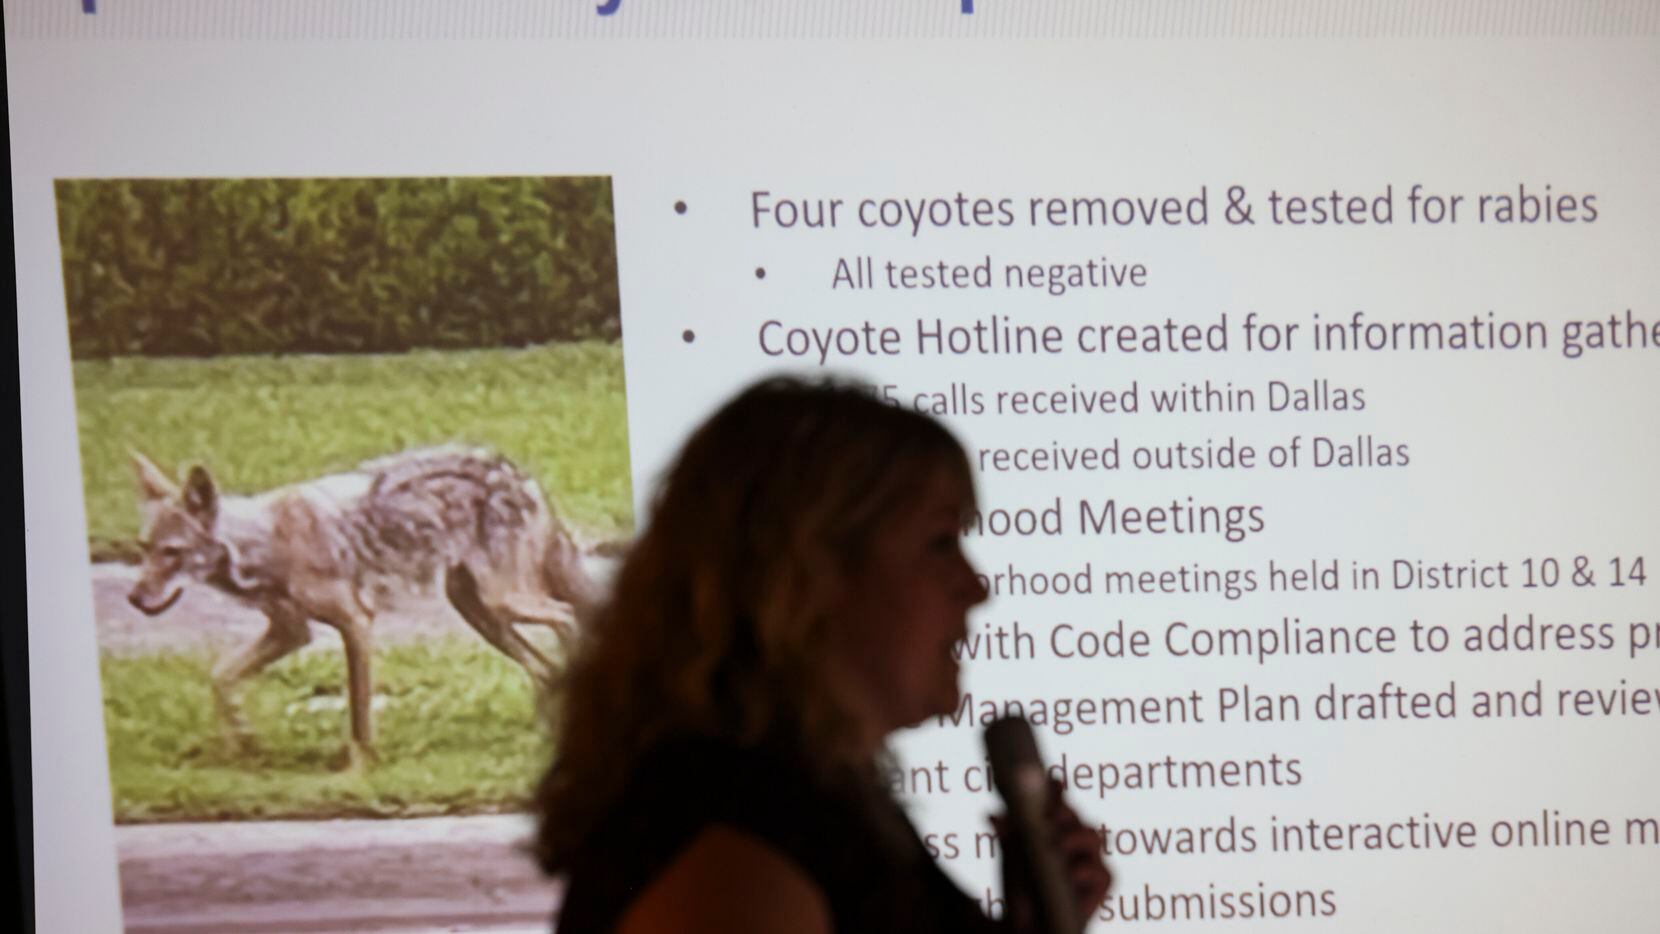 Whitney Bollinger, assistant director at Dallas Animal Services, gave an update on the...